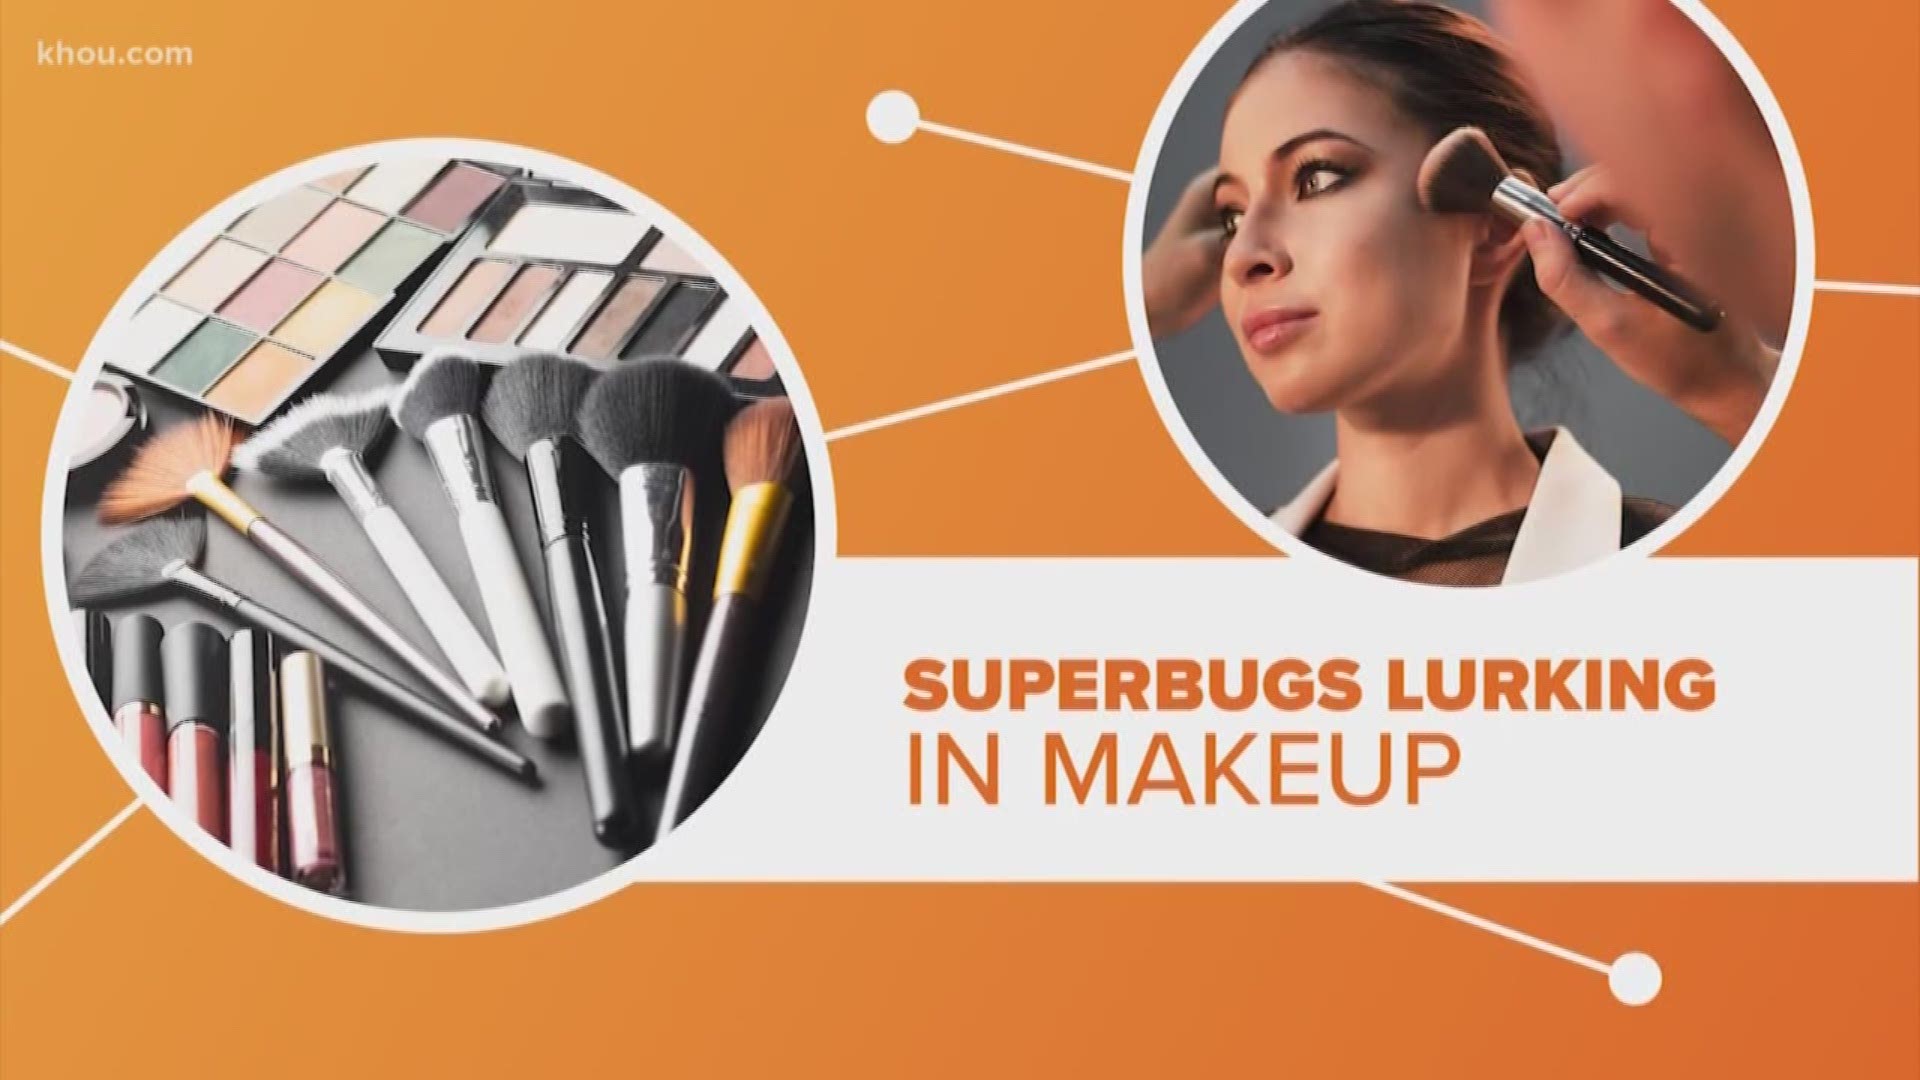 New research reveals dangerous superbugs are lurking in most makeup. Let’s connect the dots.